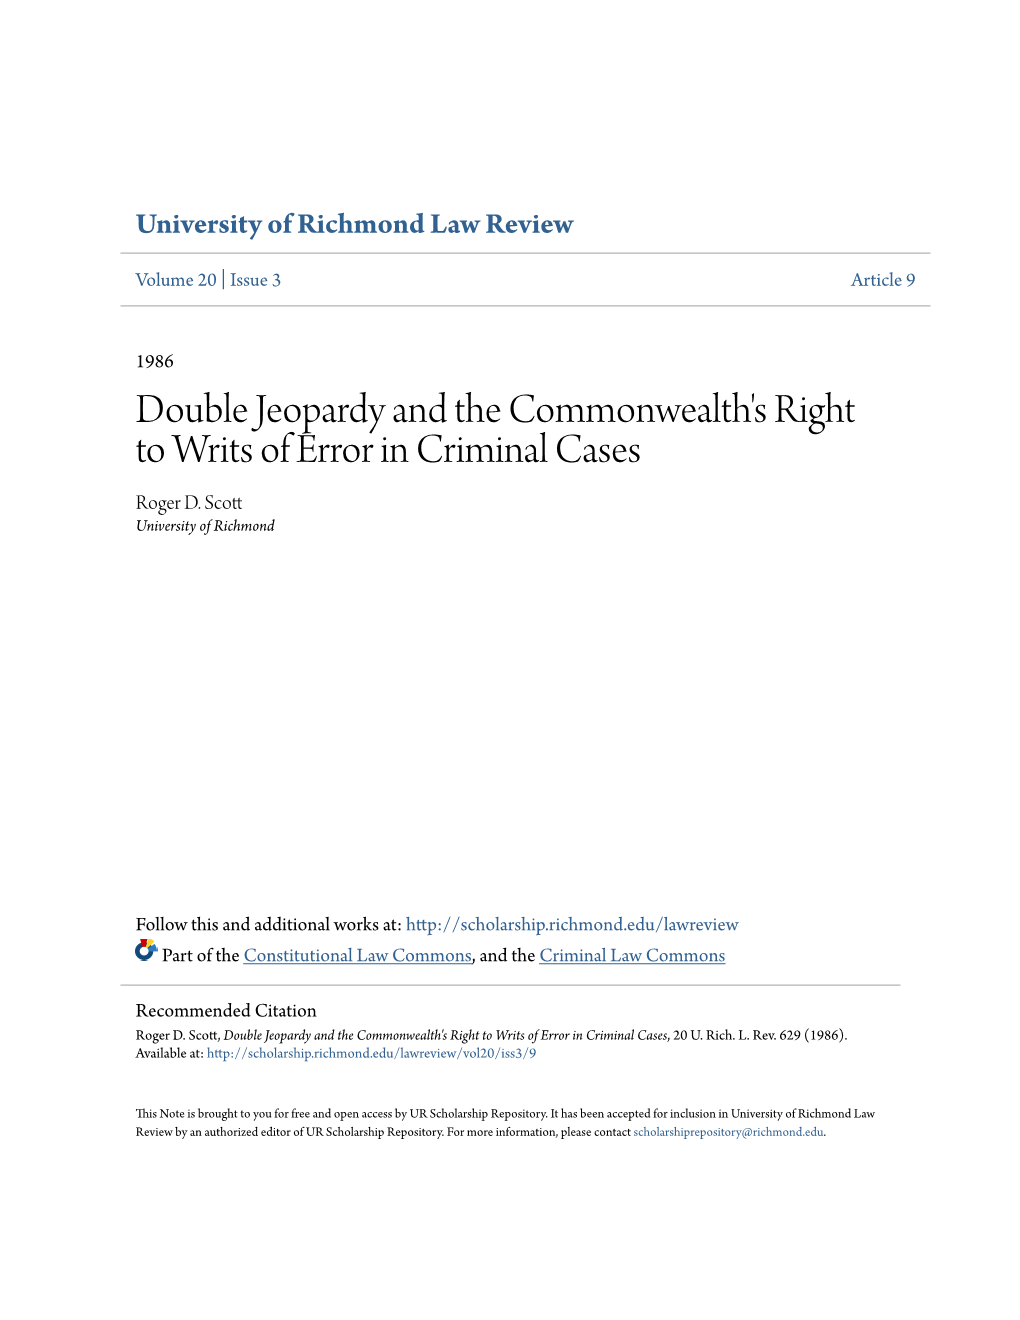 Double Jeopardy and the Commonwealth's Right to Writs of Error in Criminal Cases Roger D